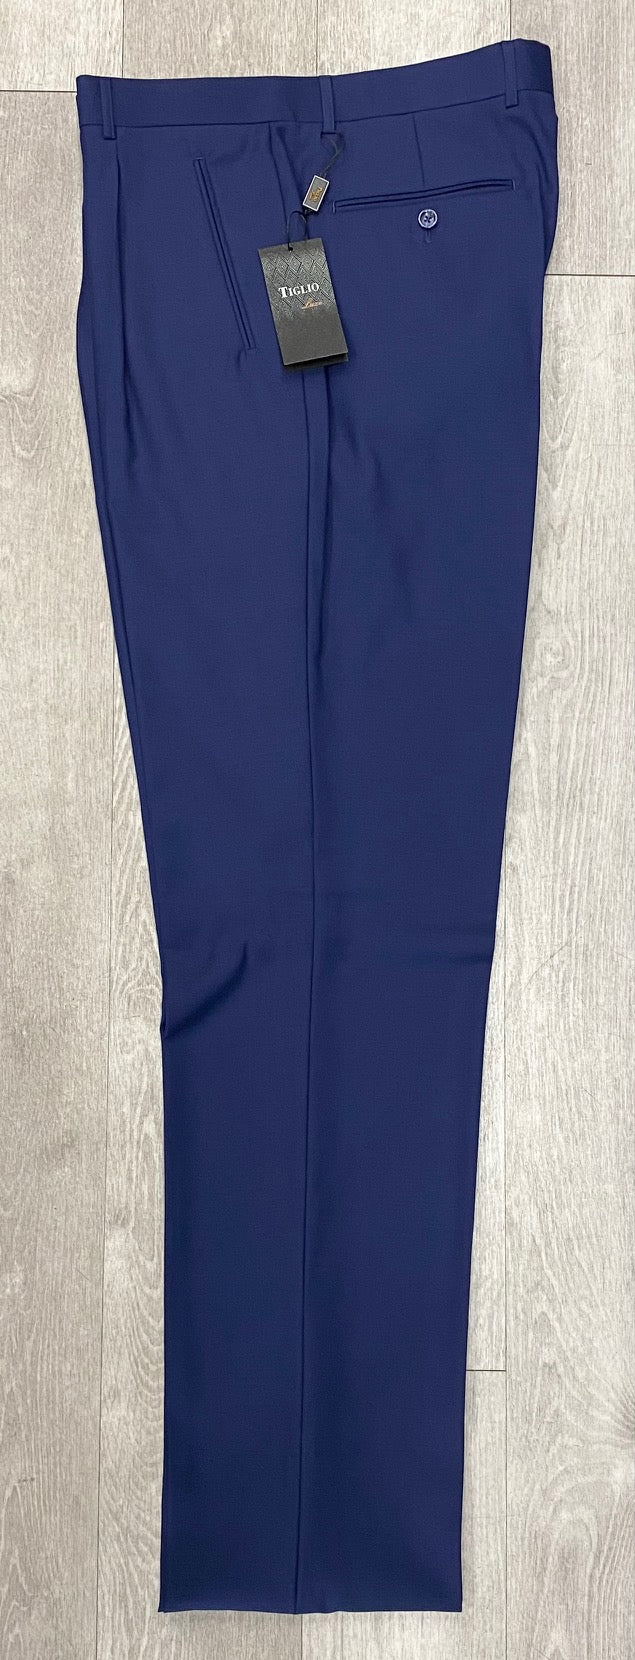 Tiglio Luxe 2521 Comfort Fit Single Pleated Pants 18+ Inch Leg TIG5966 Blue (SIZE 48 & 50 ONLY)